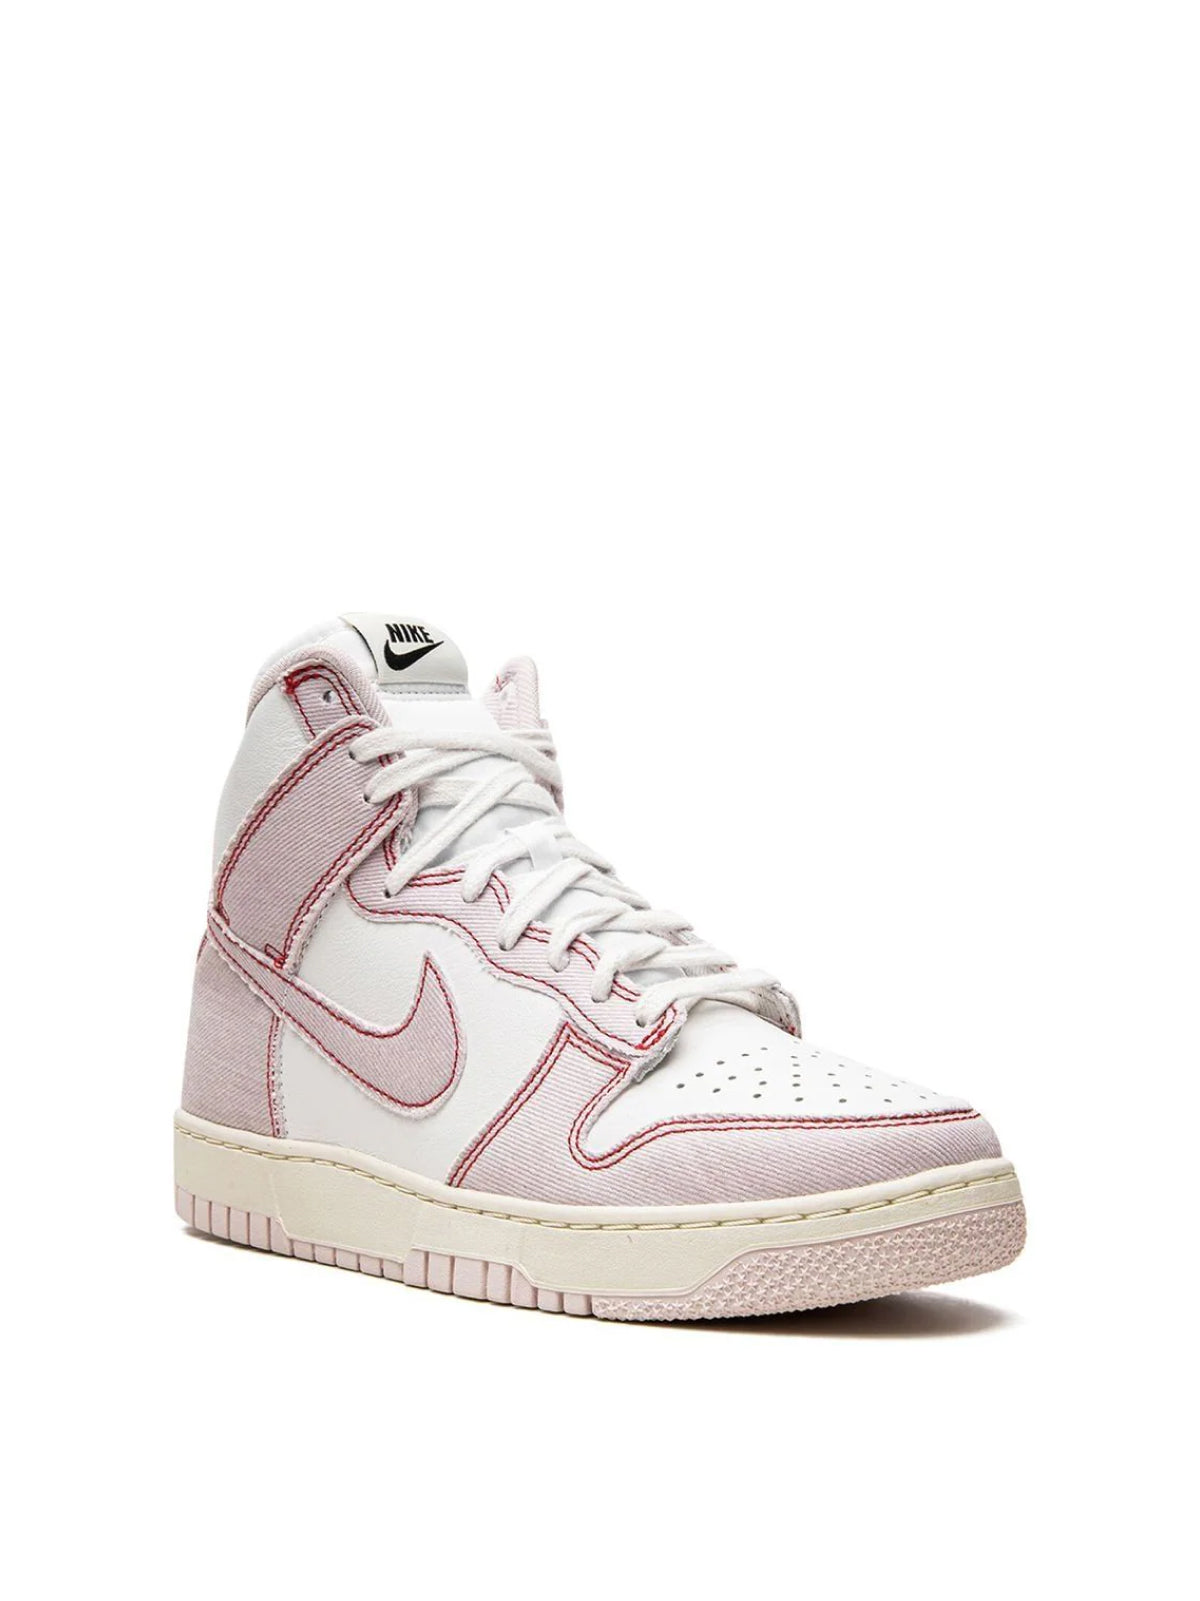 Nike-OUTLET-SALE-Dunk High 1985 'Pink Denim' Sneakers-ARCHIVIST